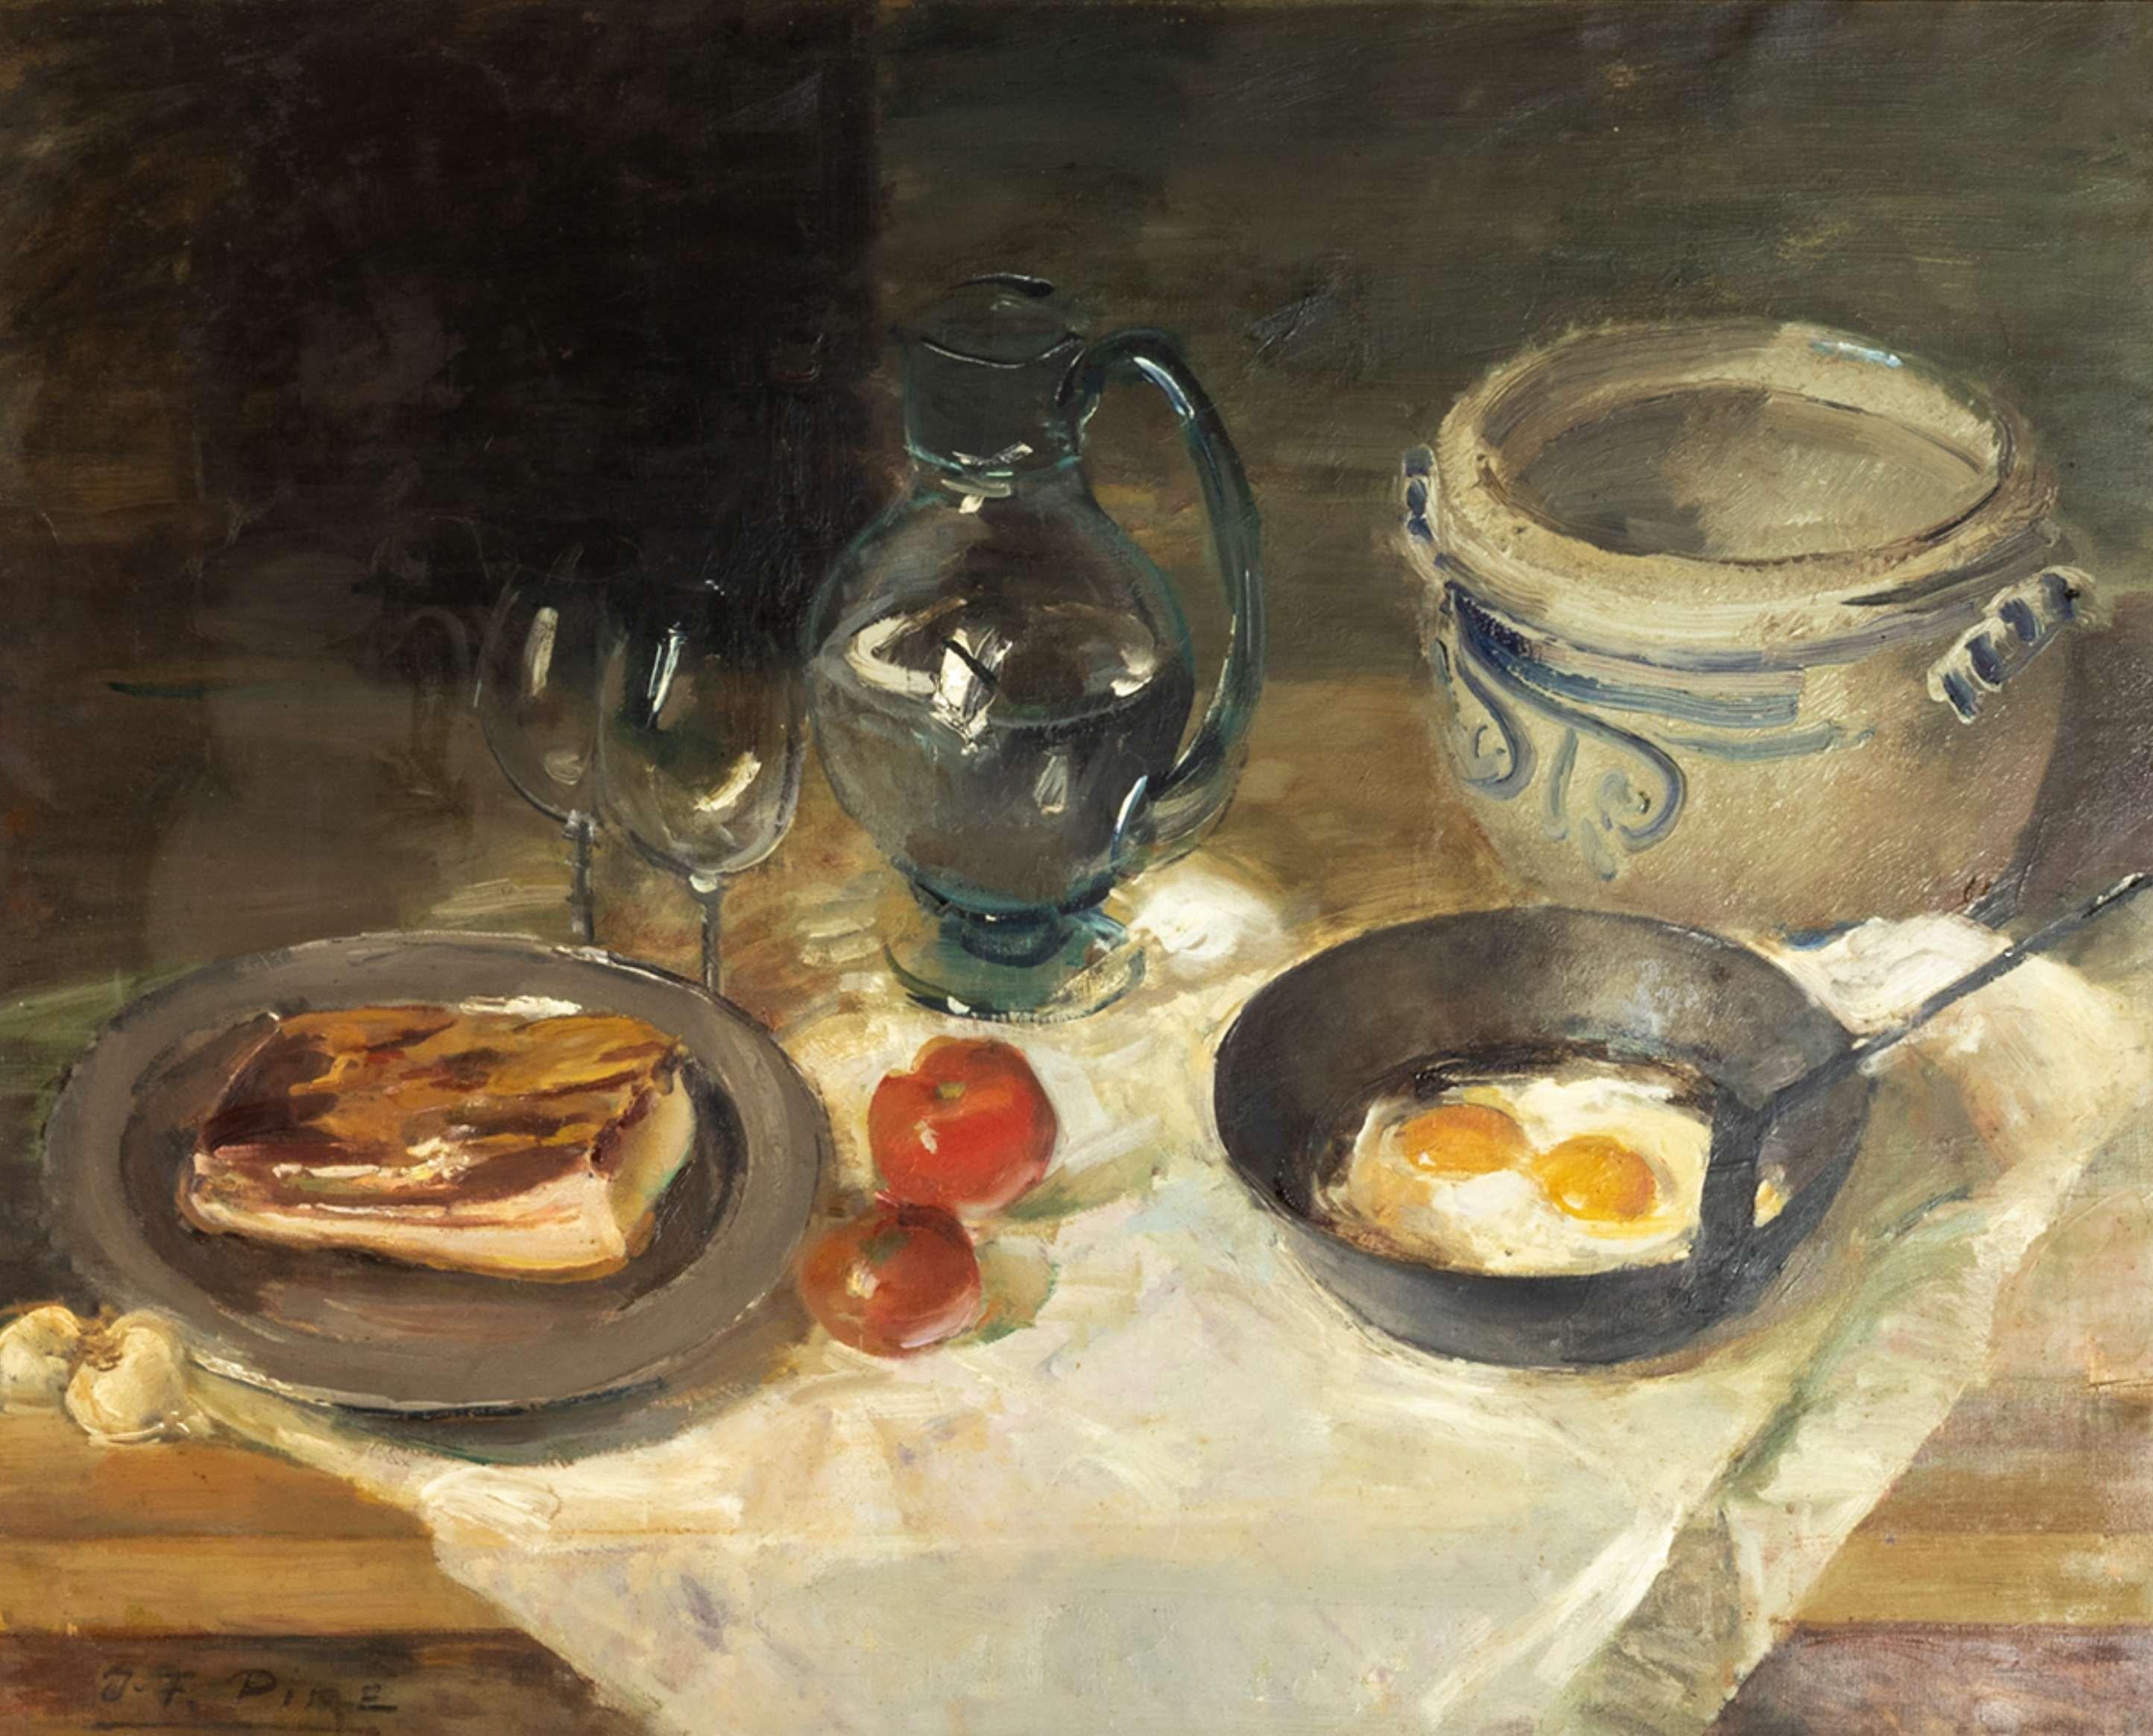 A proper meal on a pronvençal table, eggs and pastry, large glass pitcher and a vase ,all in brown, gray, and beige background. 
The monochromatic use of color is in Flemish tradition with a trail of a realistic rendition. 
Oil on canvas with a